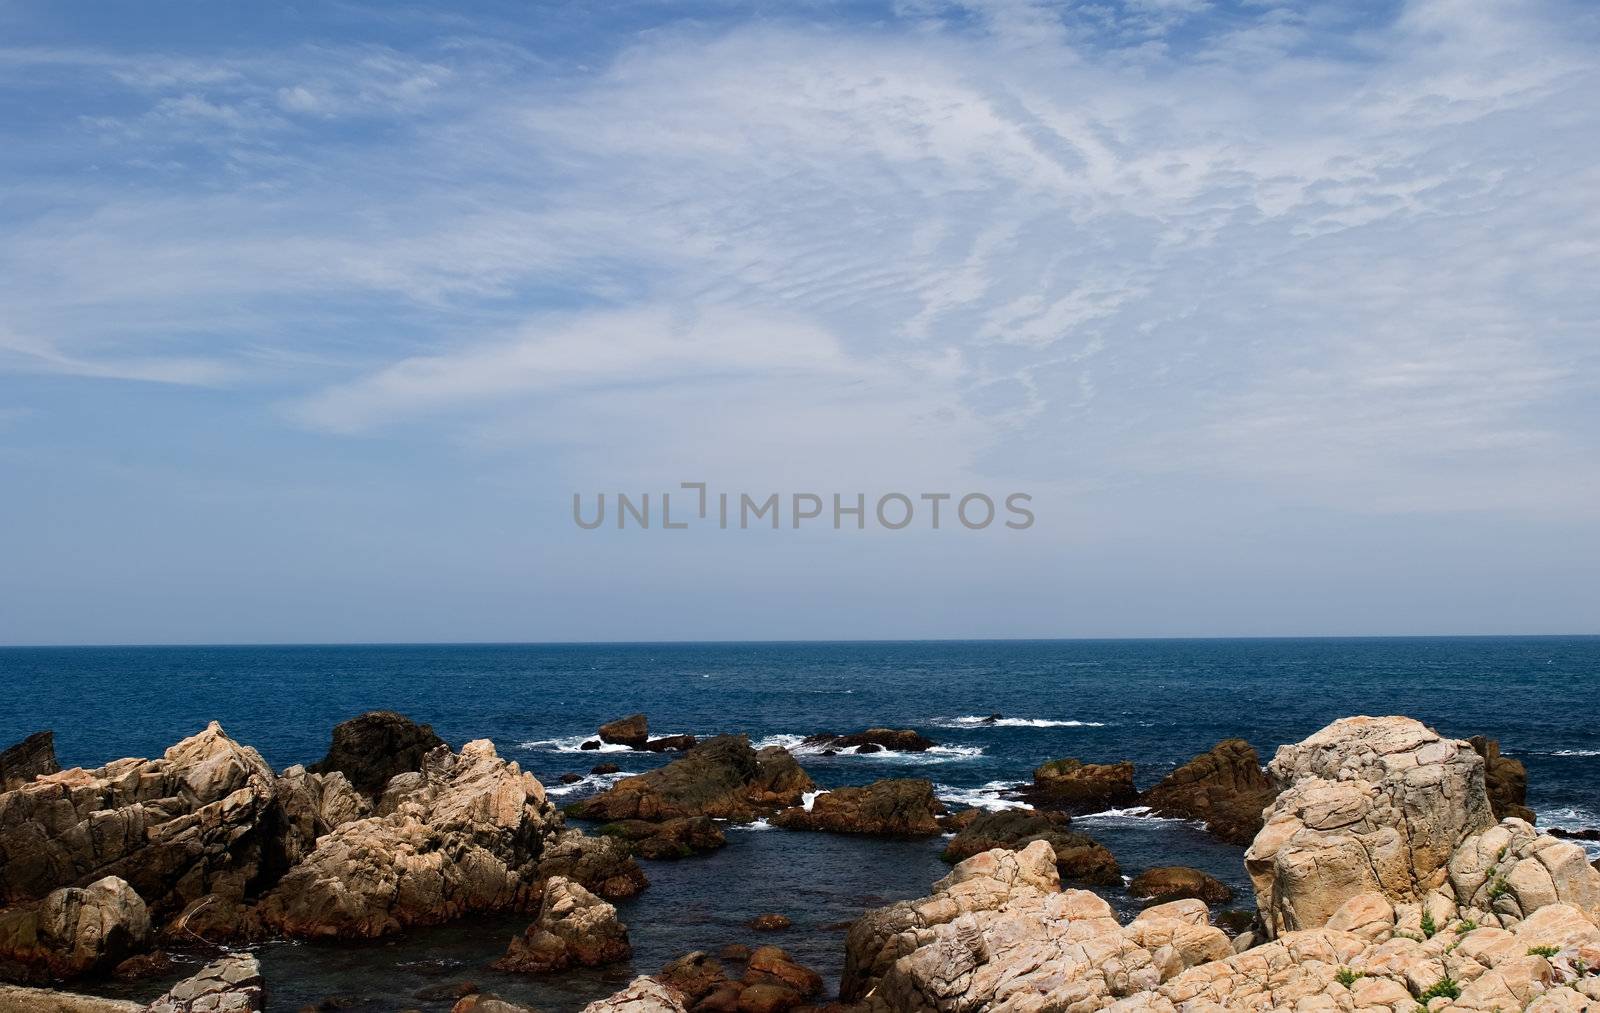 It is a beautiful seascape of rock and blue sea water.